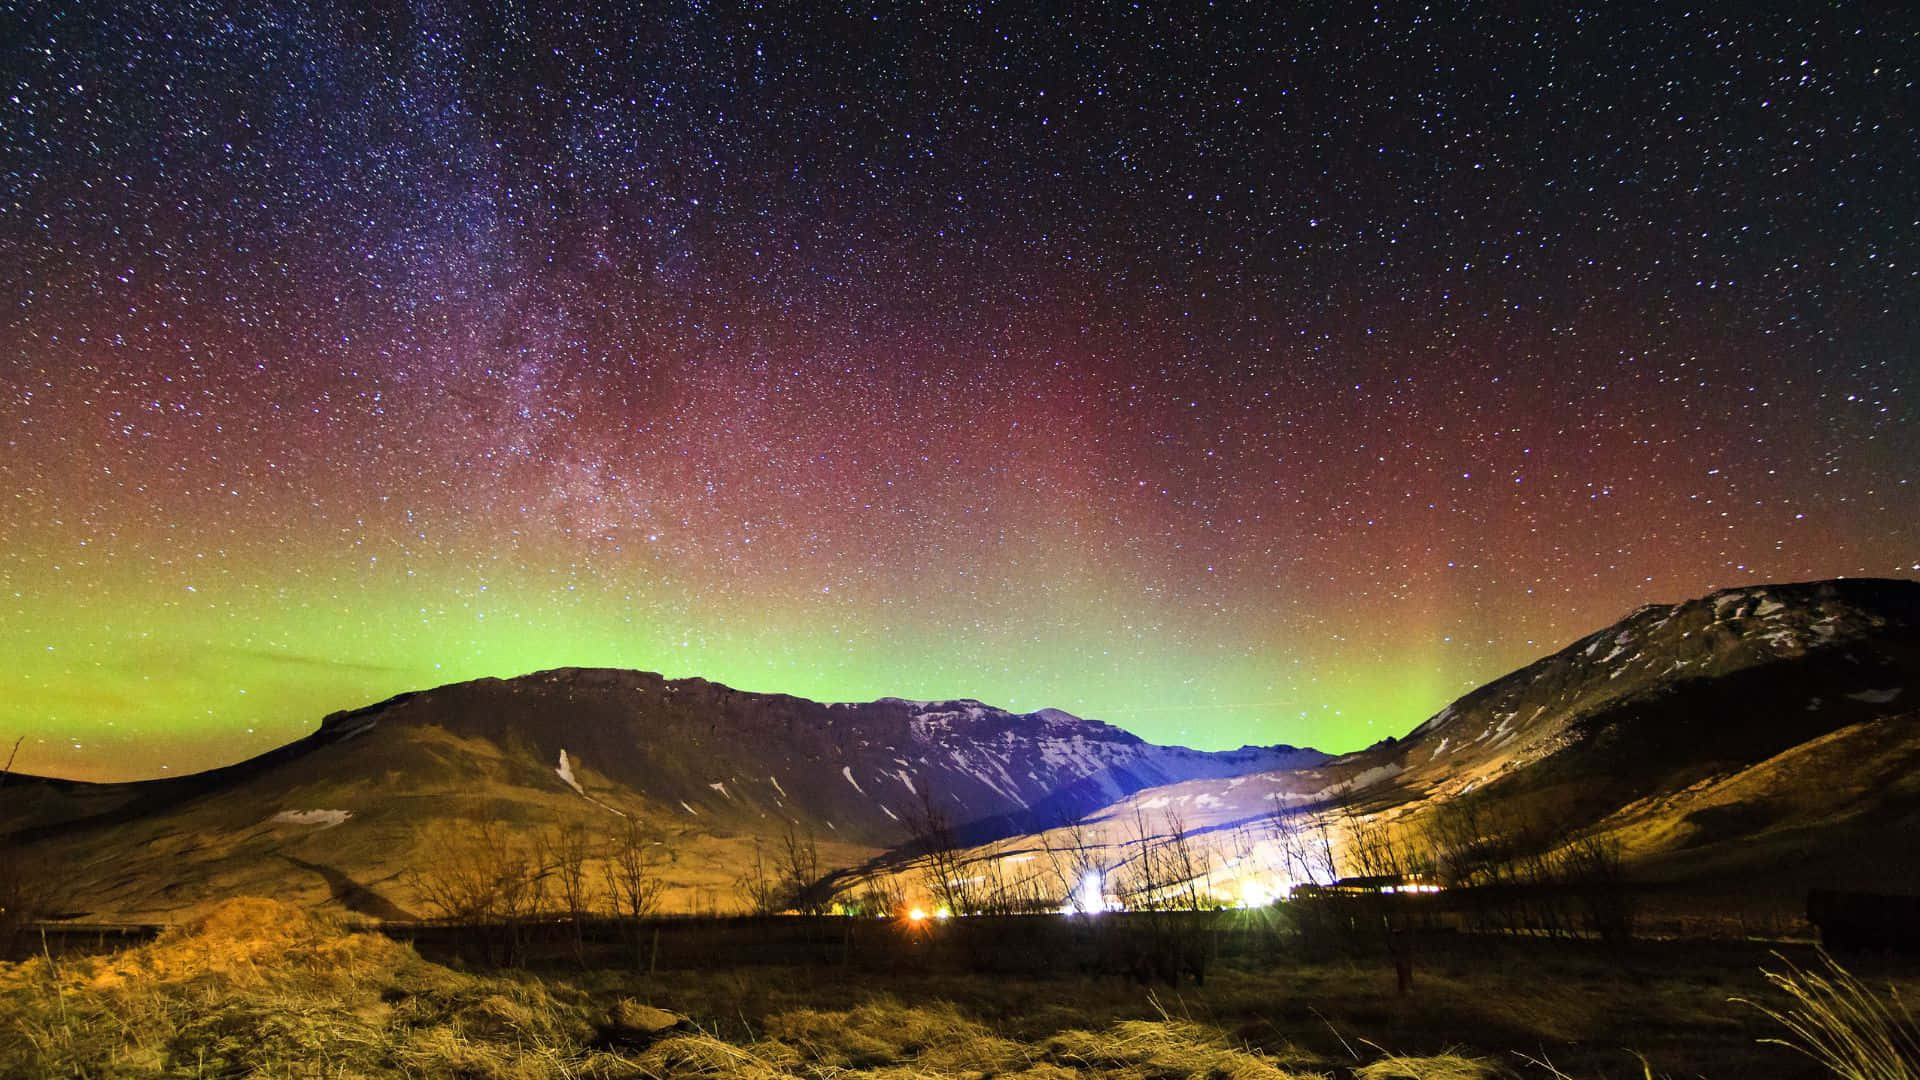 The heavens open up to reveal the breathtaking Northern Lights